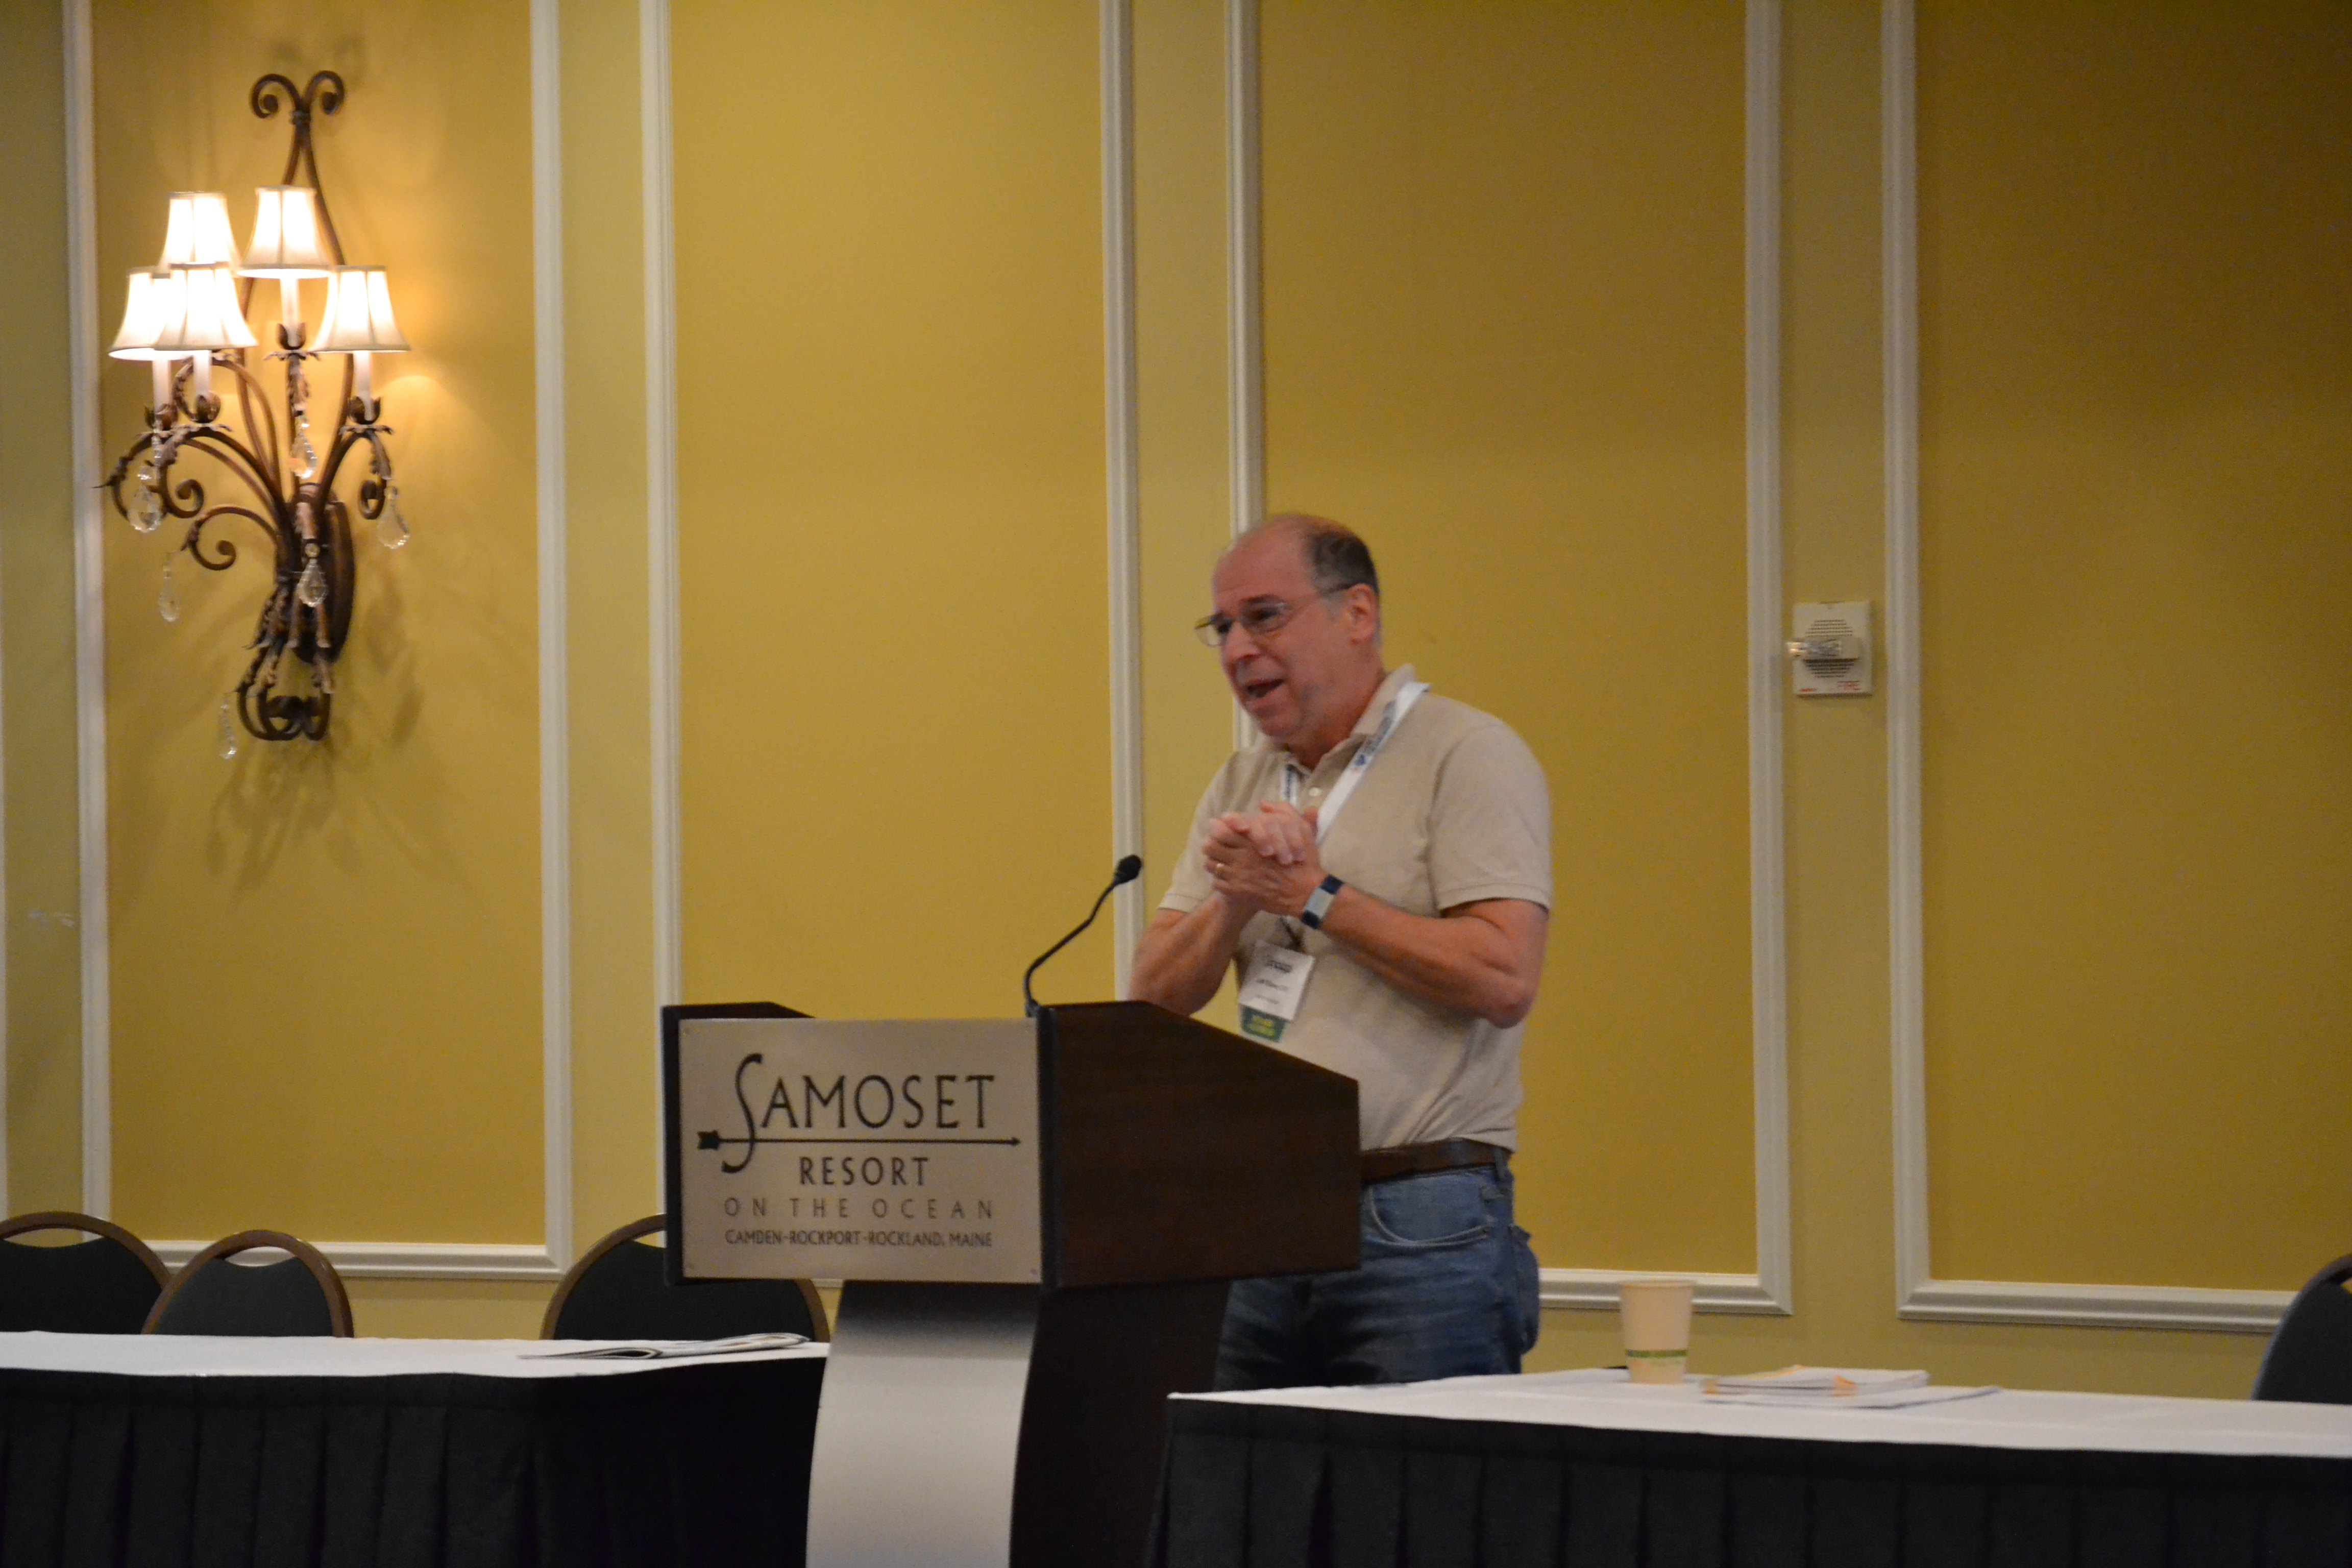 Member's Meeting Report - Dr. Stone, Oral Health